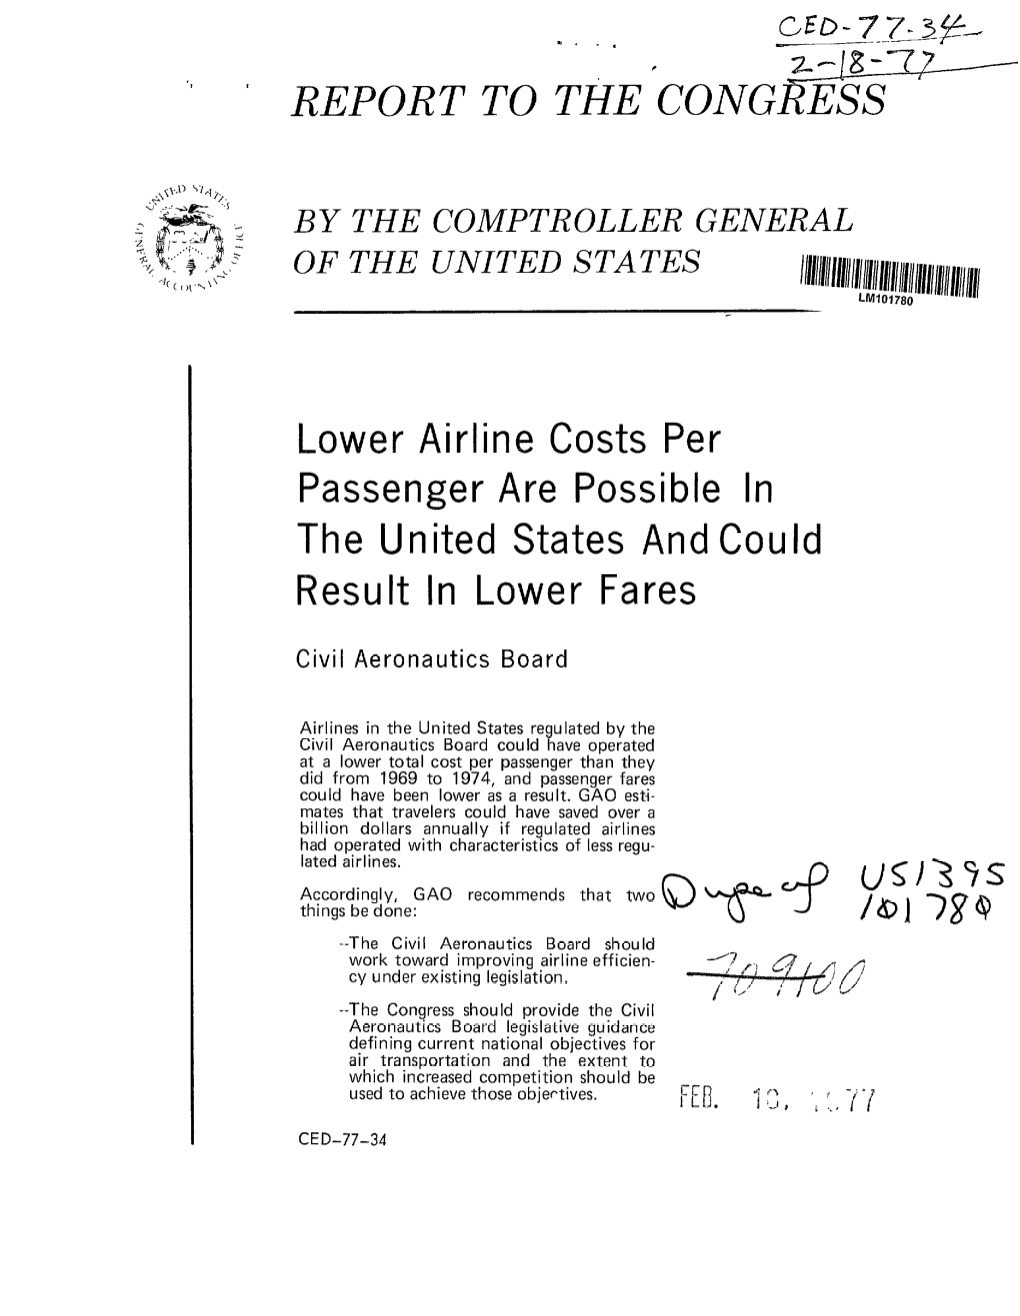 CED-77-34 Lower Airline Costs Per Passenger Are Possible in The